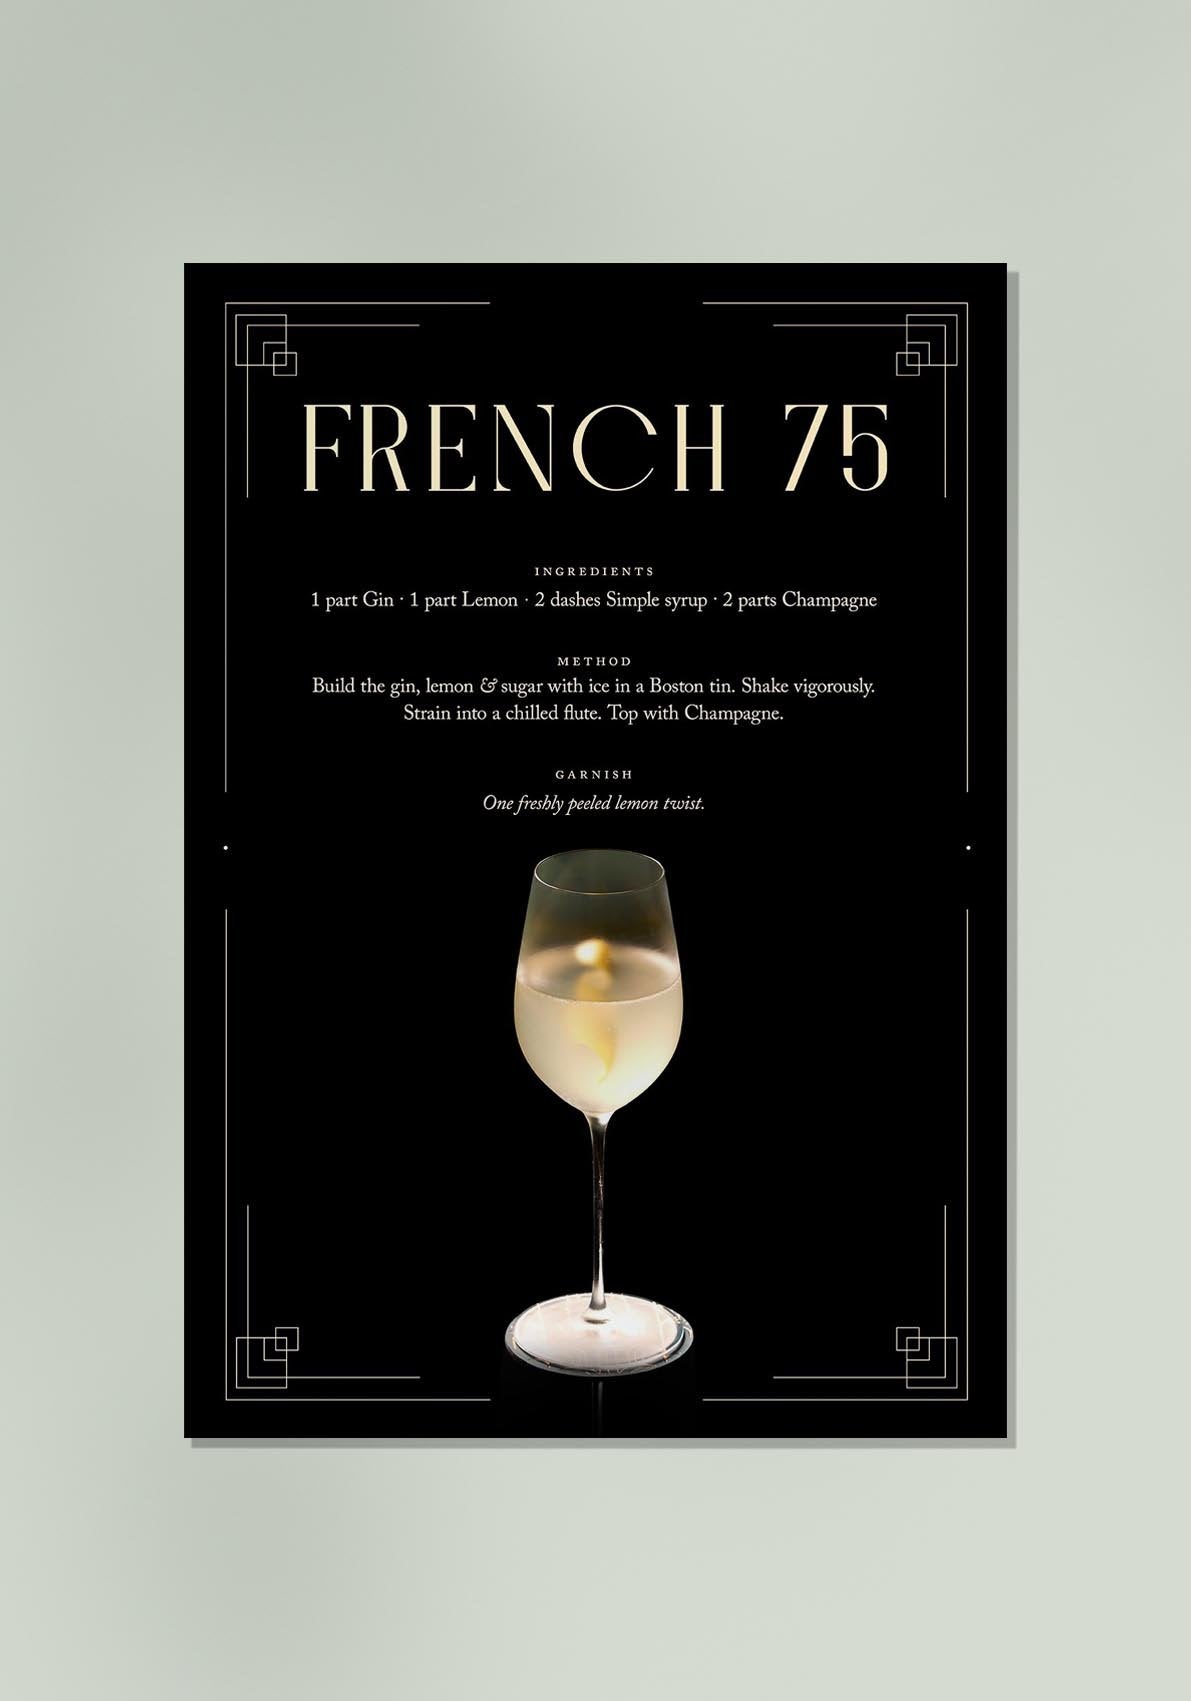 French 75 Cocktail Recipe Poster